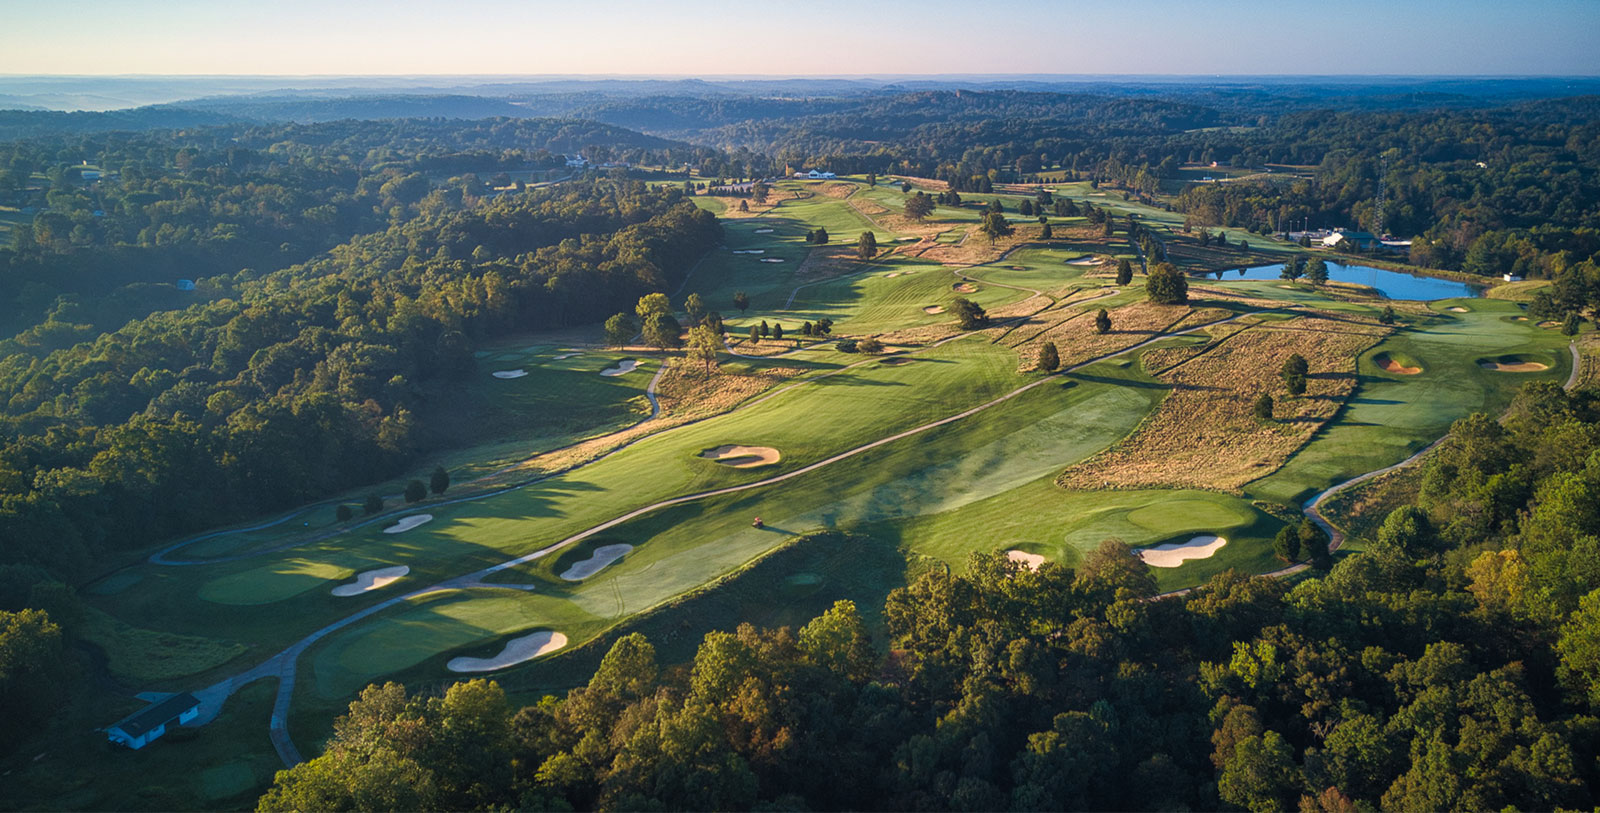 Image of The Donald Ross Course Aerial View, French Lick Springs Hotel, 1845, Member of Historic Hotels of America, in French Lick, Indiana, Golf.